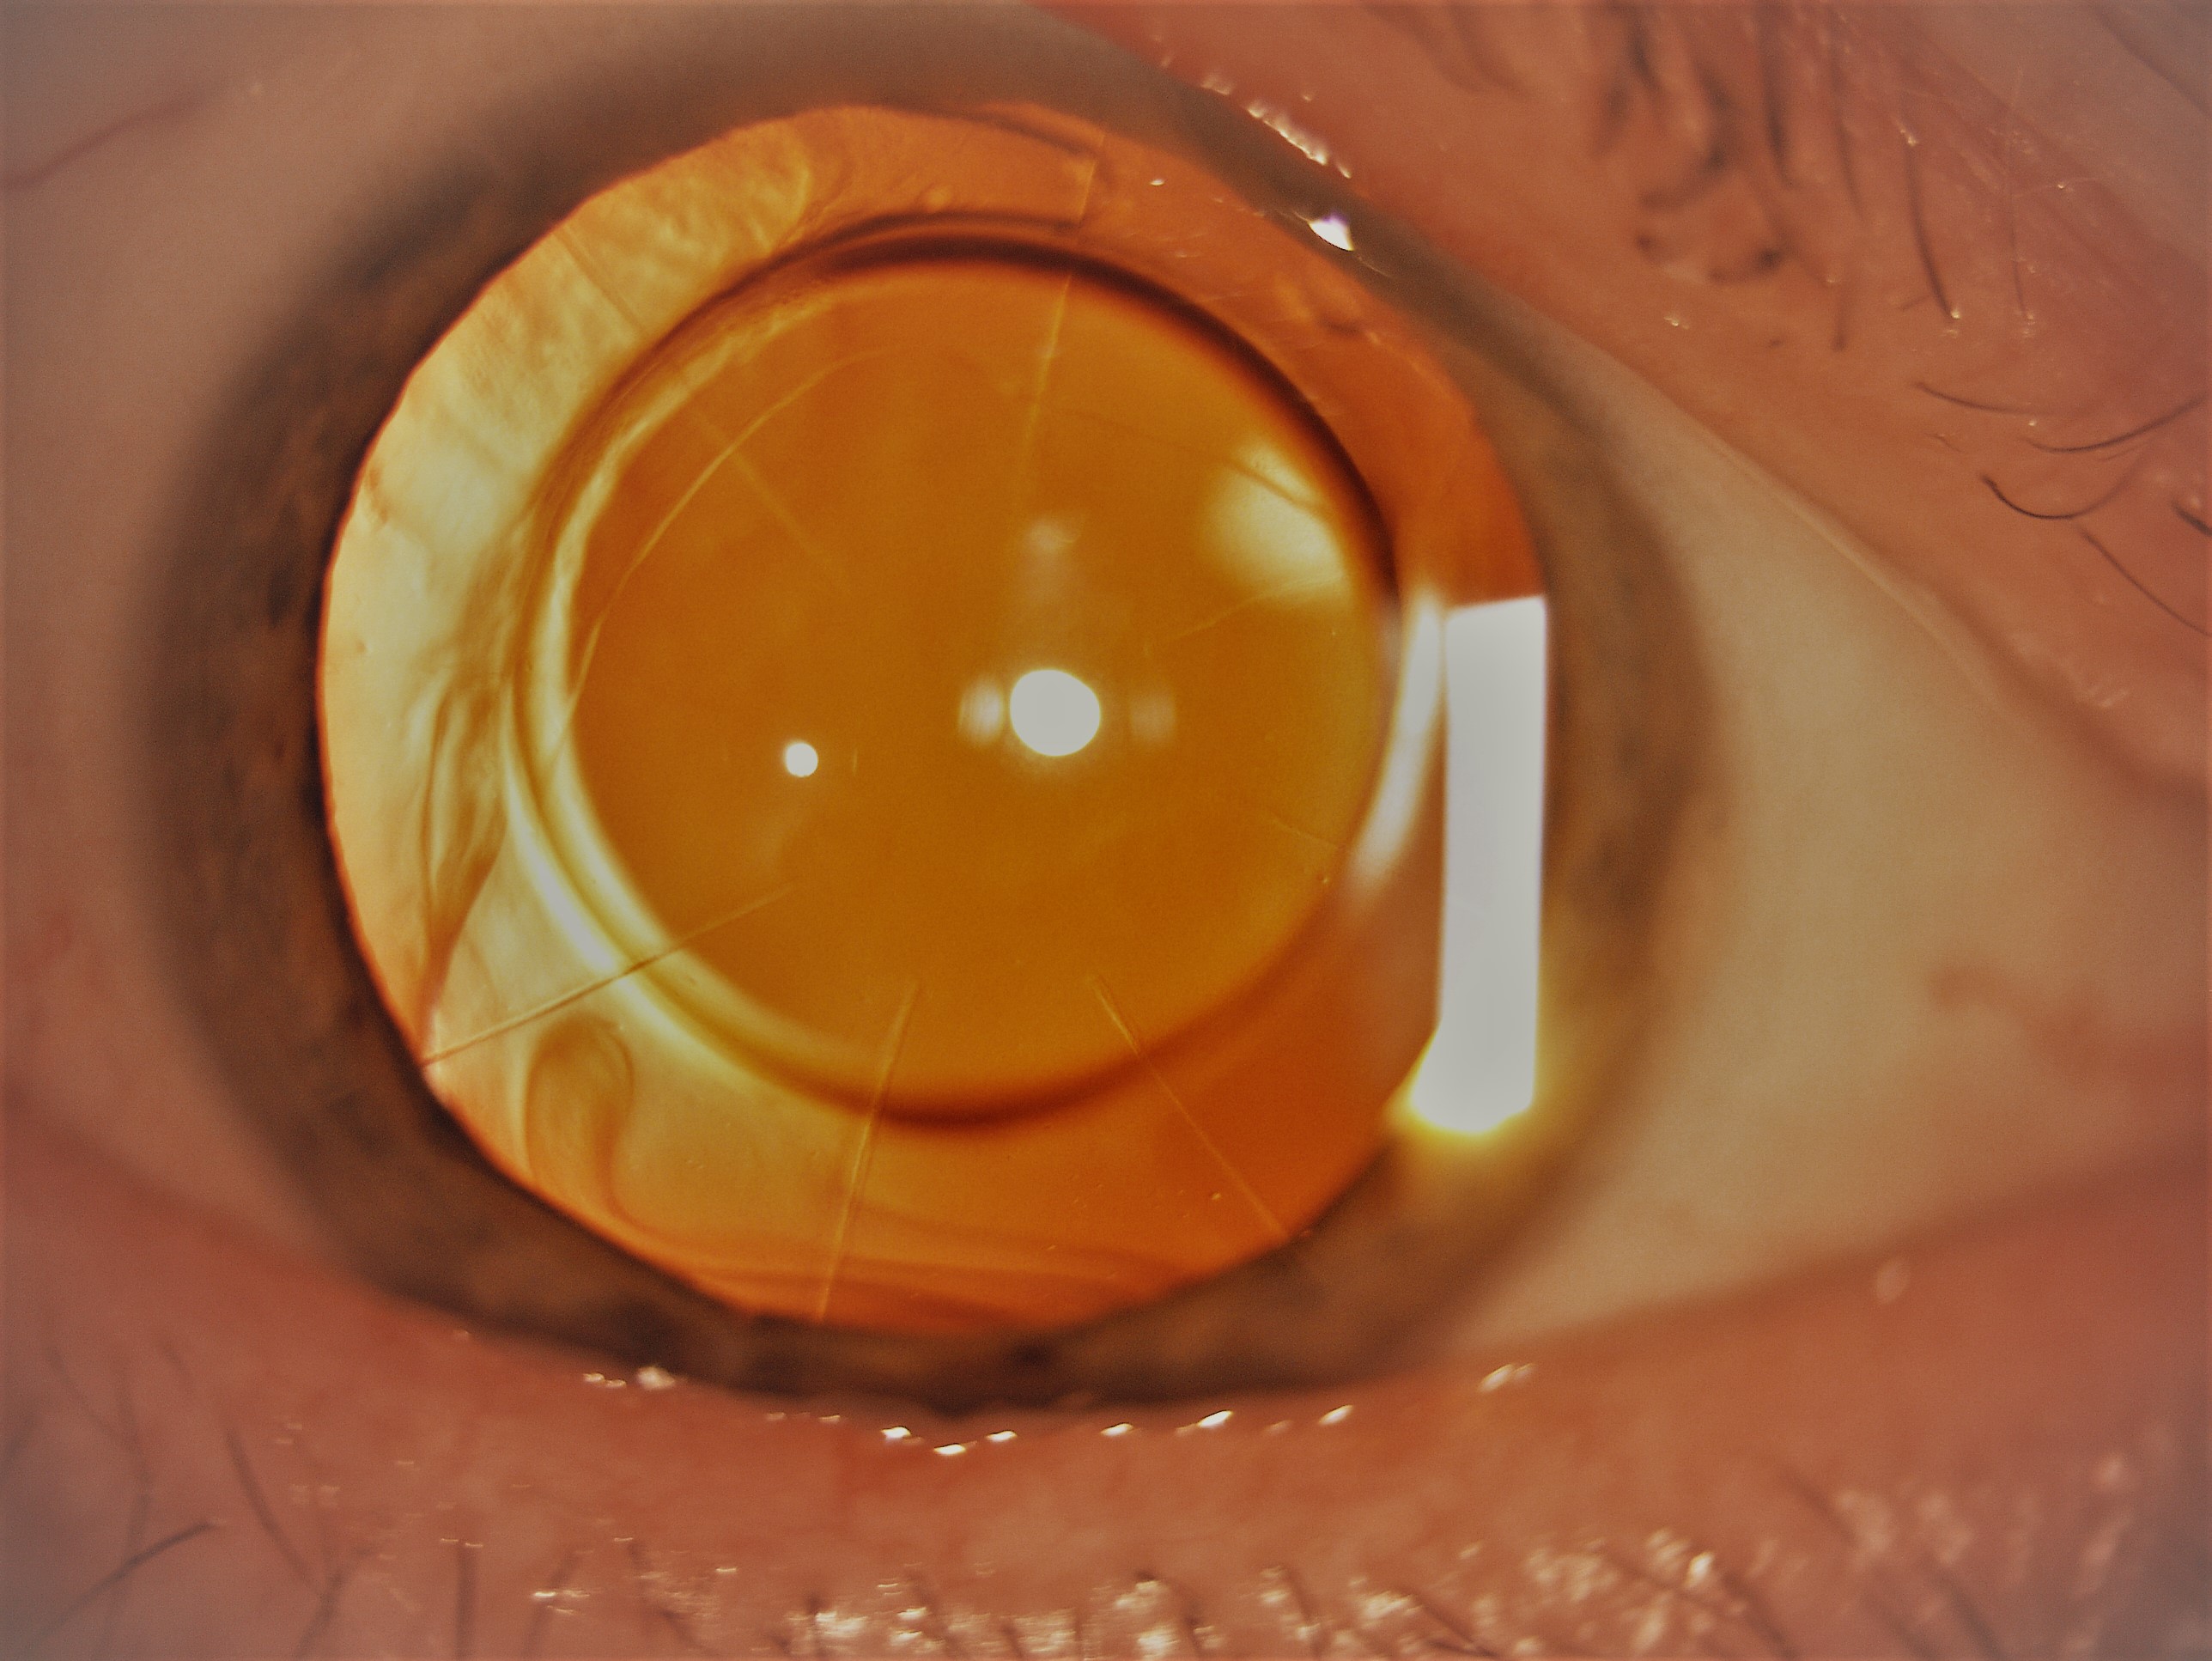 Standard 8-incision radial keratotomy with sparing of the pupillary zone. 